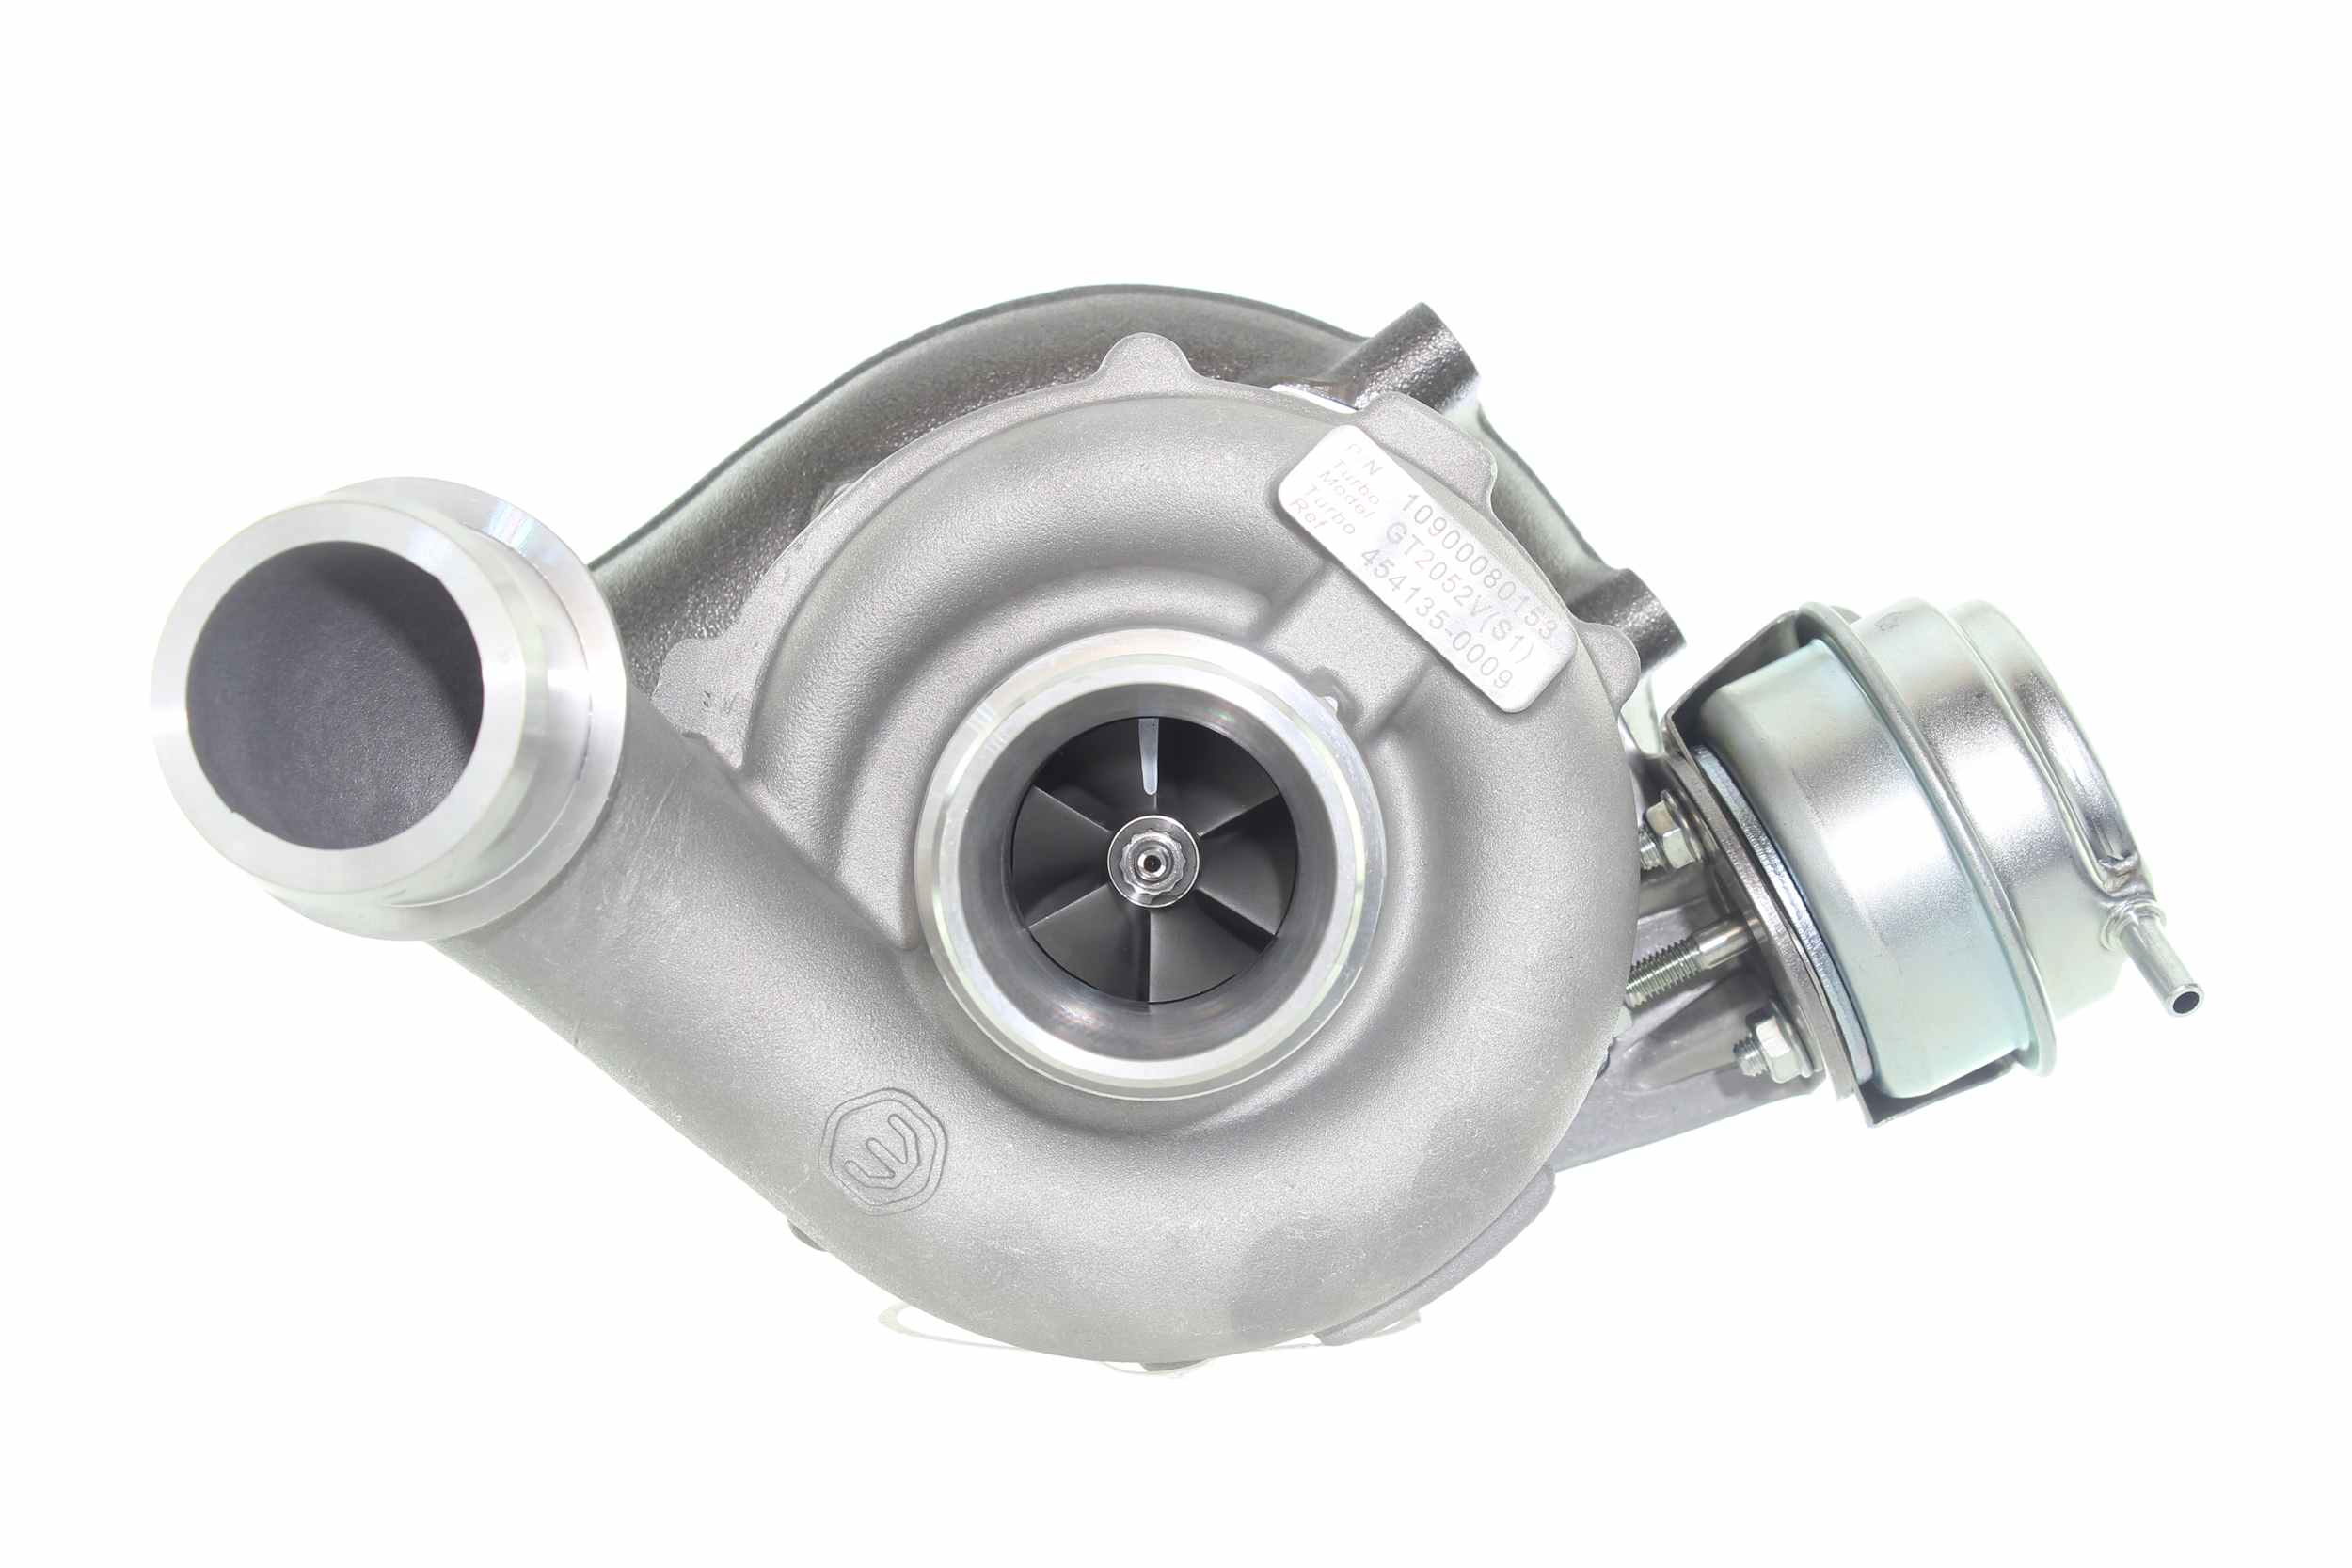 ALANKO 10900080 Turbocharger Exhaust Turbocharger, Incl. Gasket Set, with attachment material